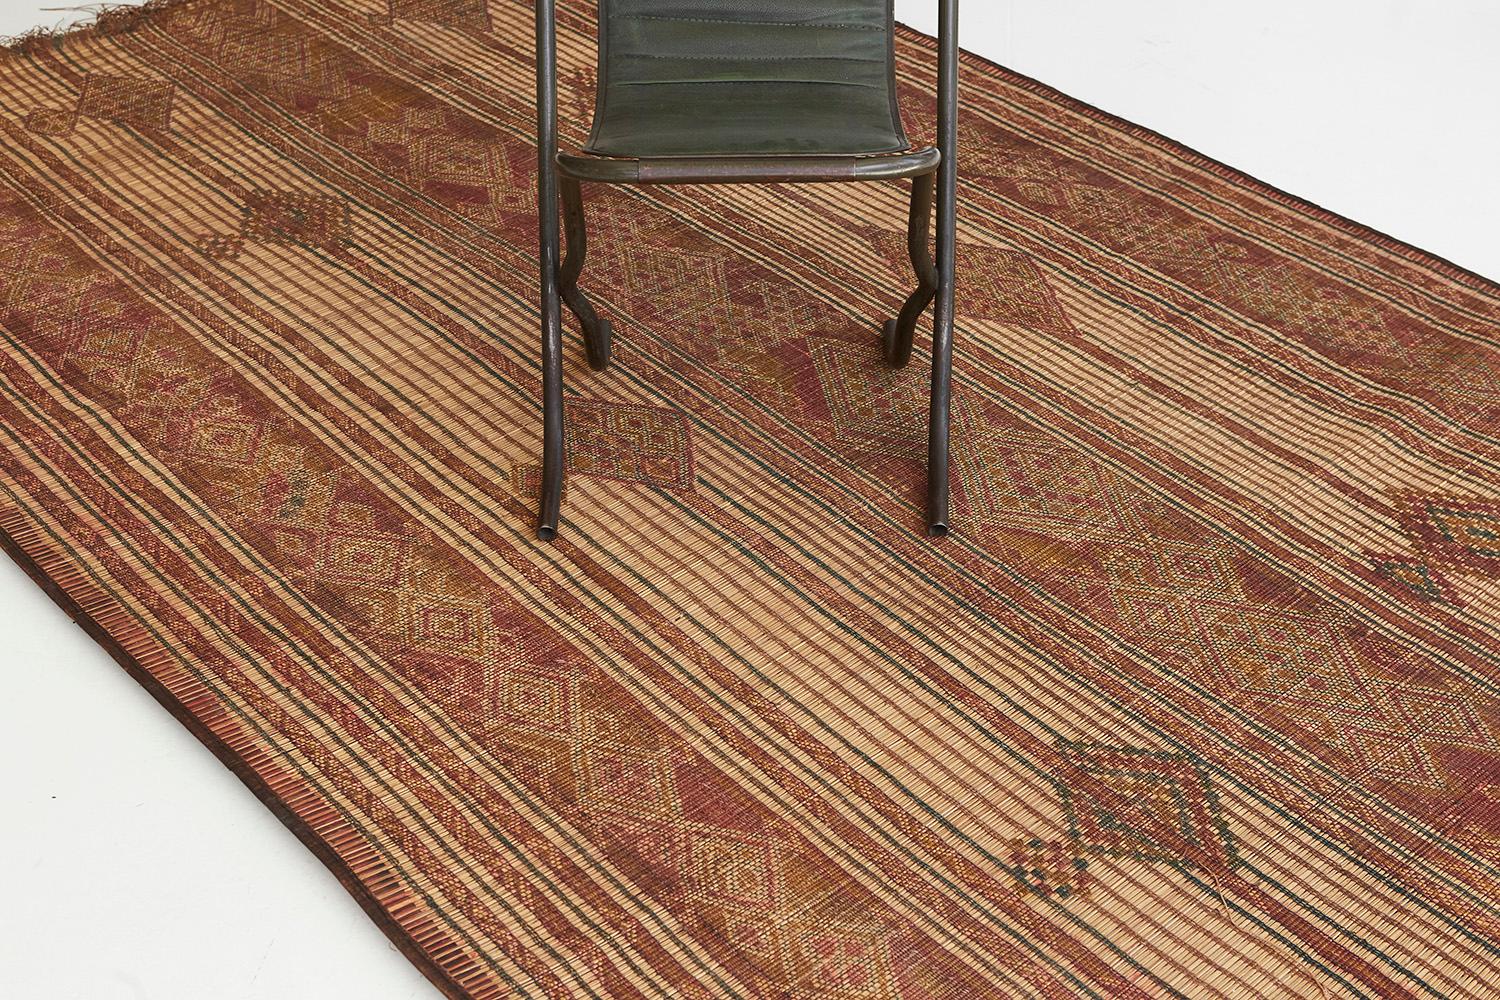 Tuareg mats are fated to be loved by the next generation because of their handwoven from reed and leather. Never be outdated to fashions and styles, their crisscross patterns and checkered designs are versatile that can be matched with any interior.